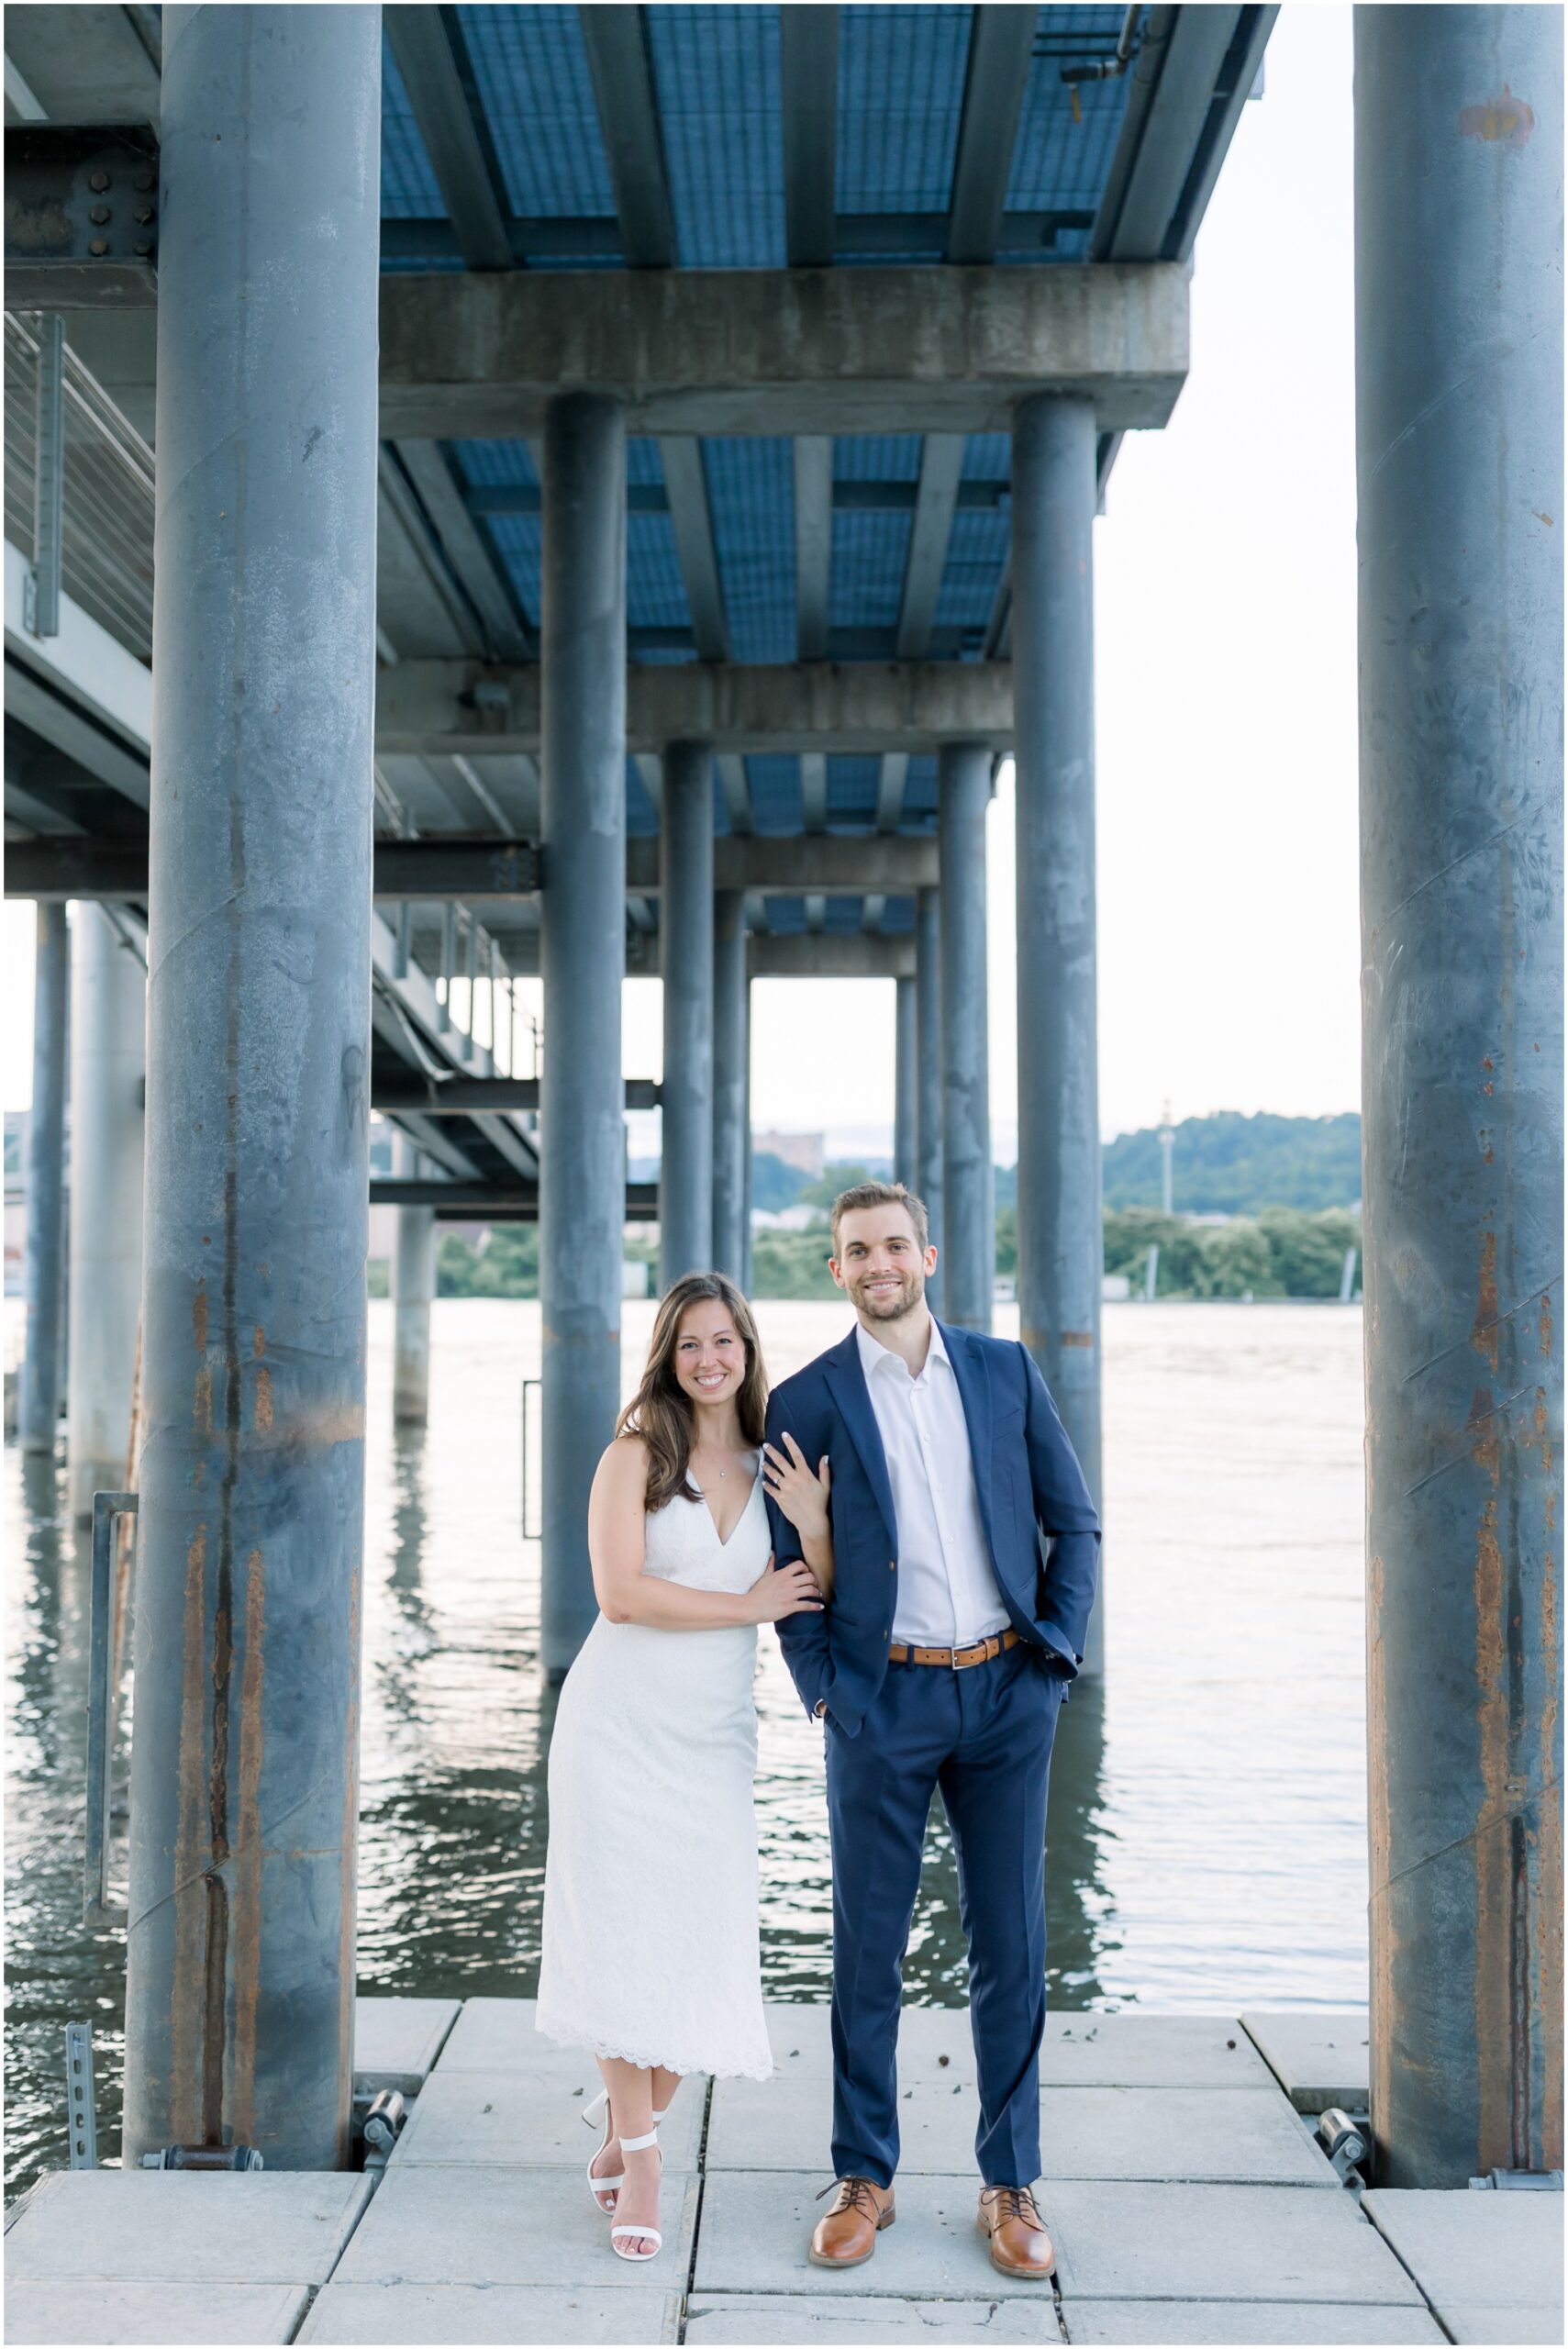 Engagement Photo Outfits for Summer by chattanooga wedding photographer alyssa rachelle photography